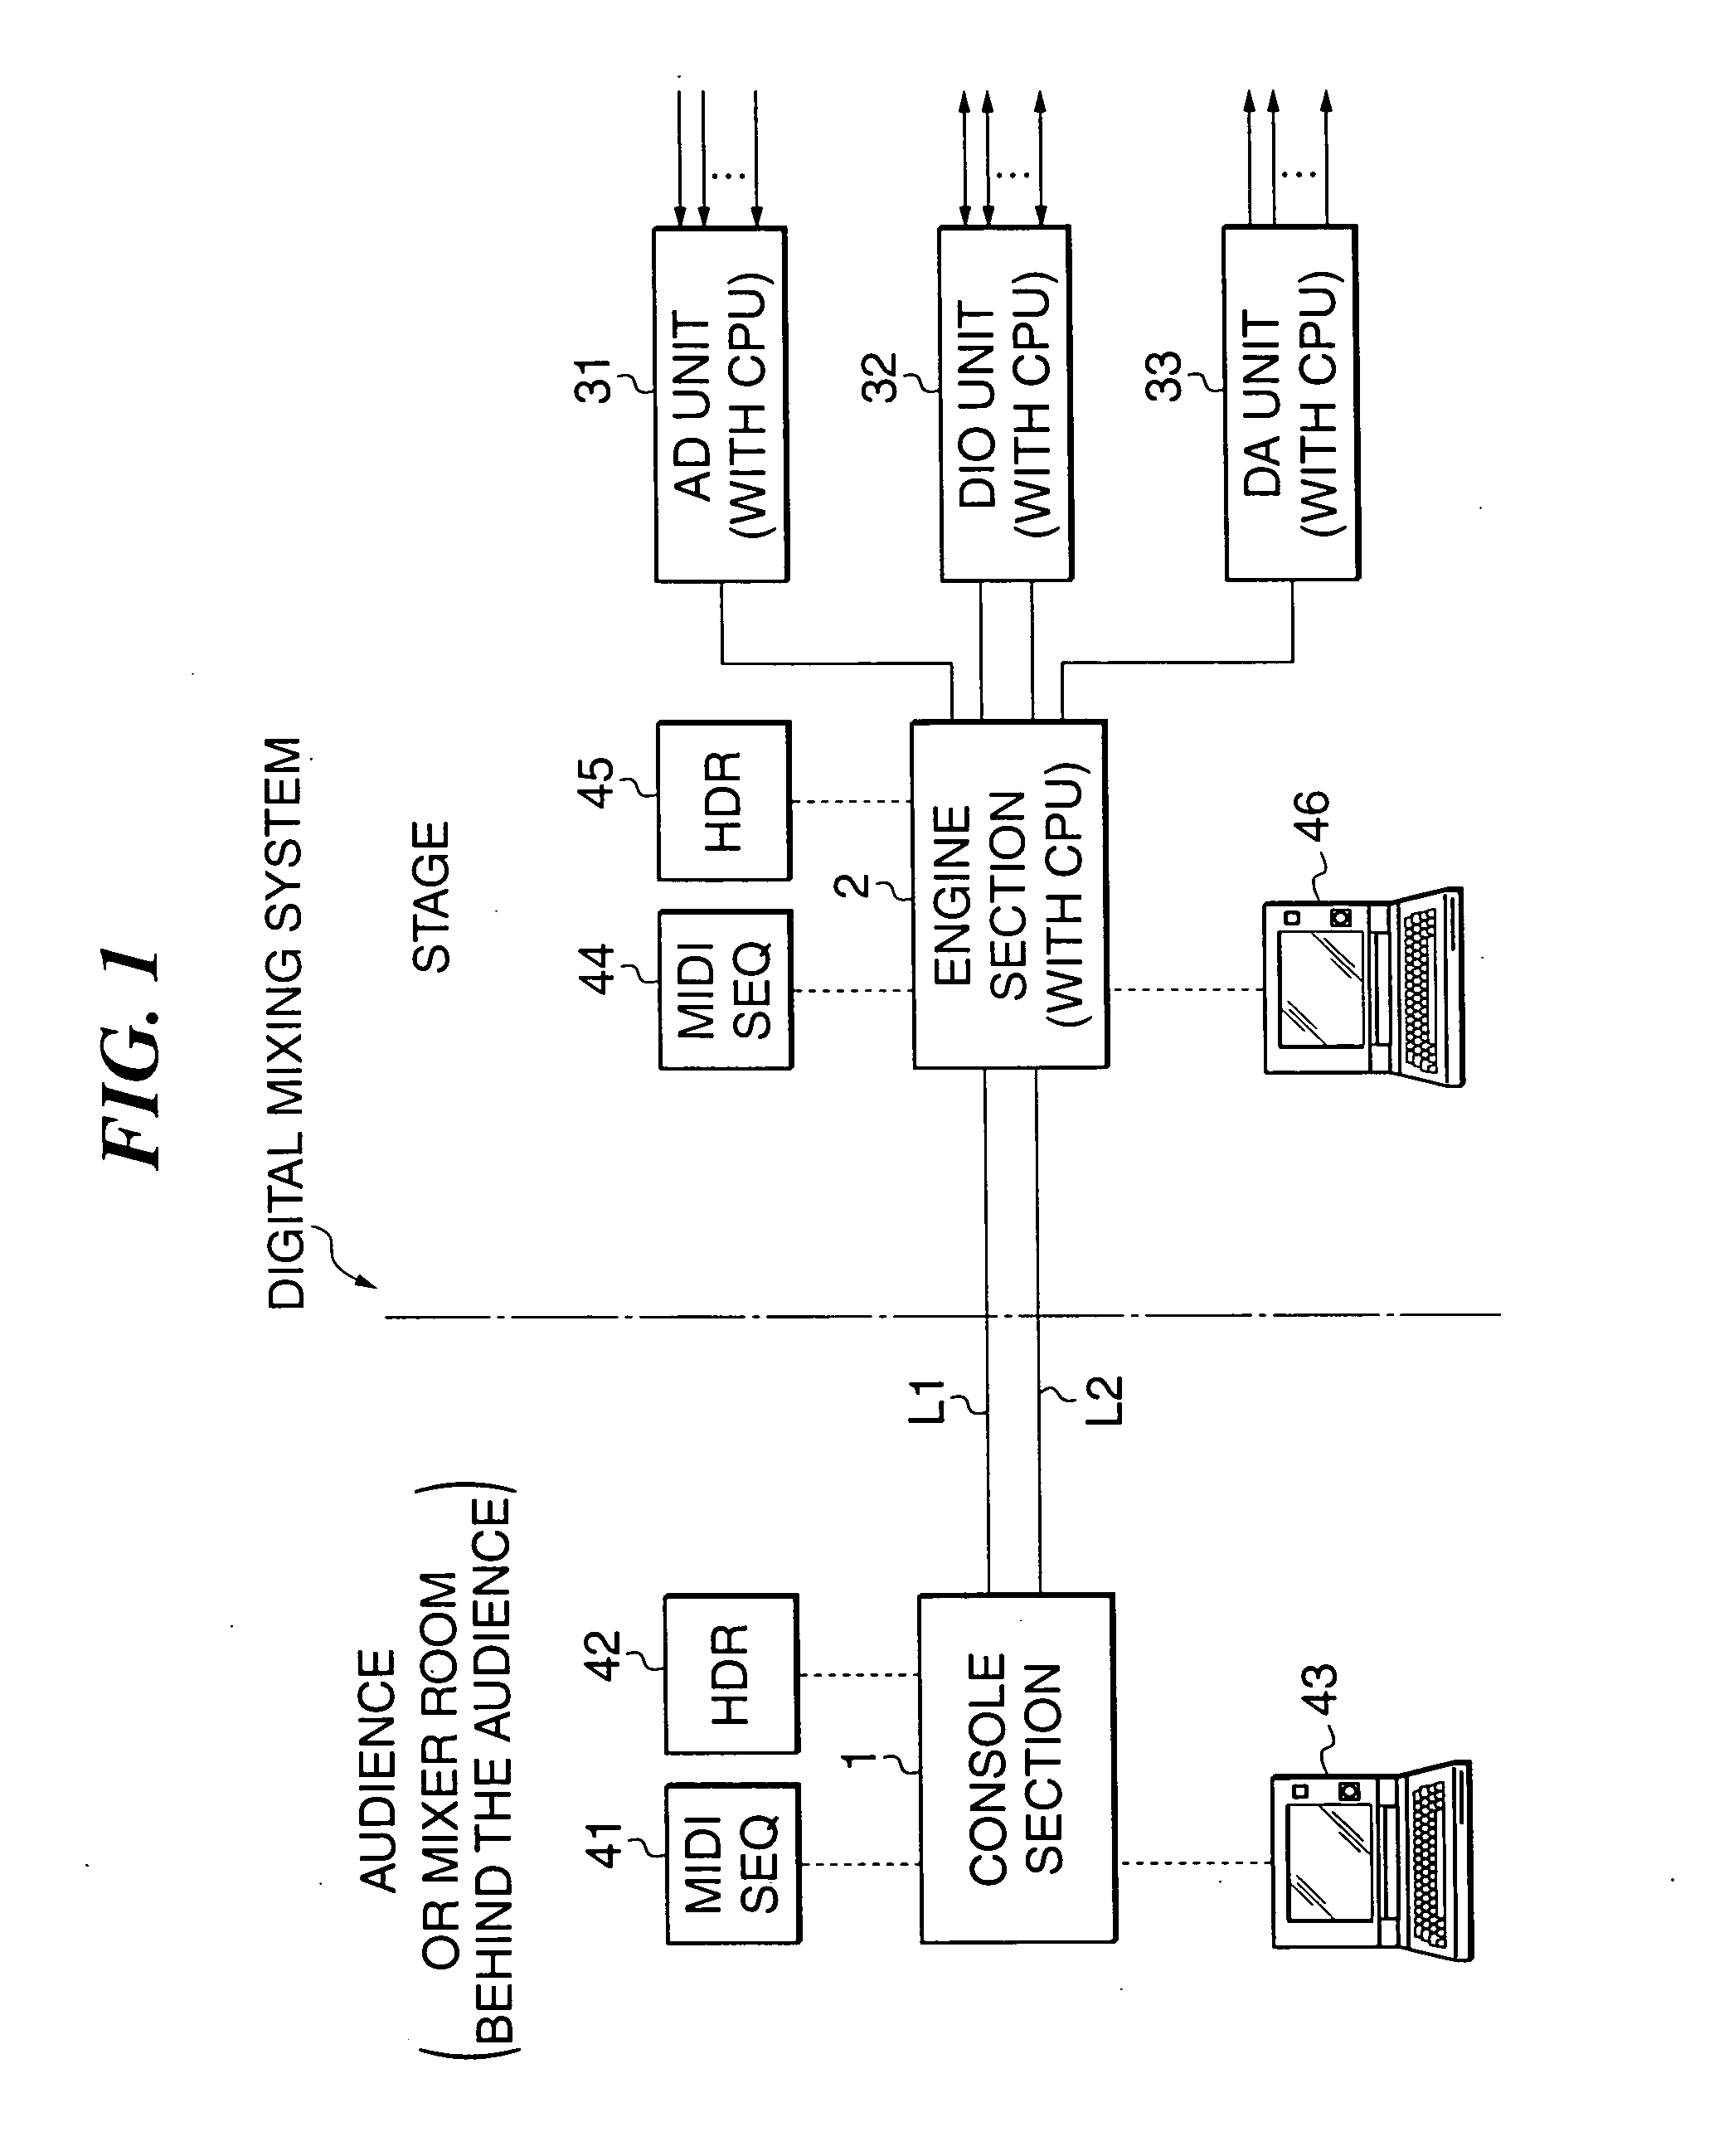 Digital mixing system, engine apparatus, console apparatus, digital mixing method, engine apparatus control method, console apparatus control method, and programs executing these control methods